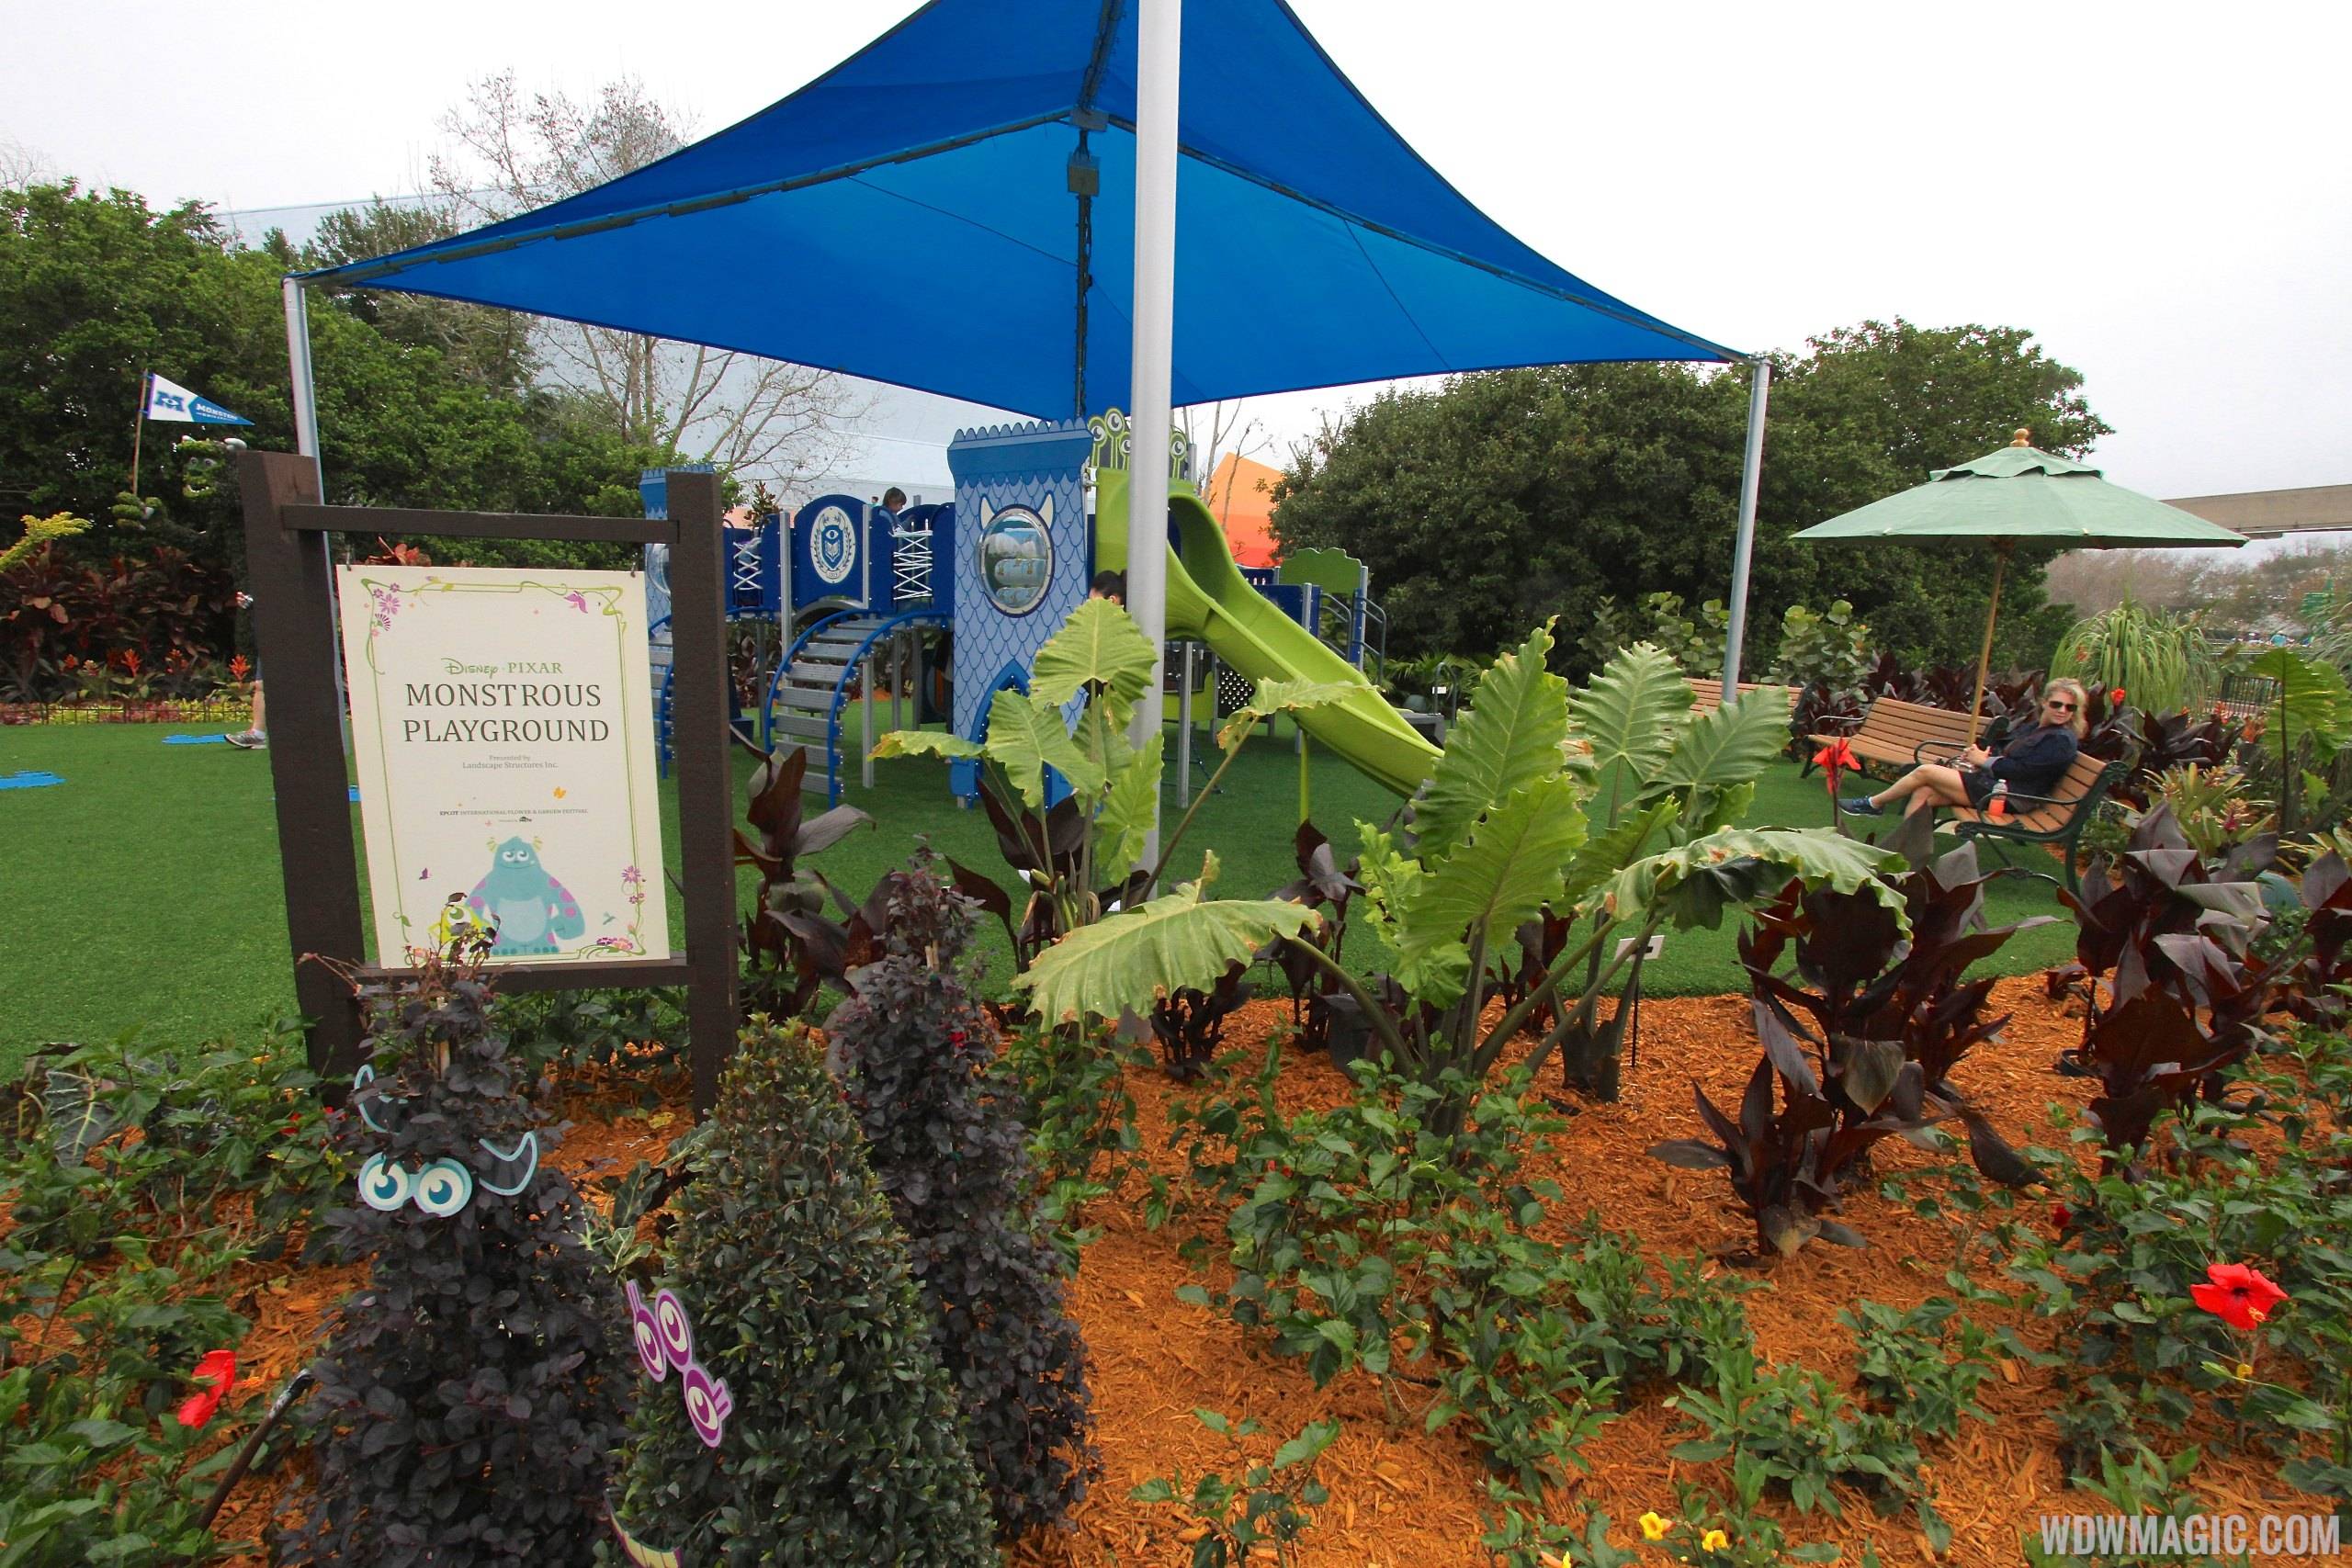 2014 Epcot International Flower and Garden Festival opening day tour